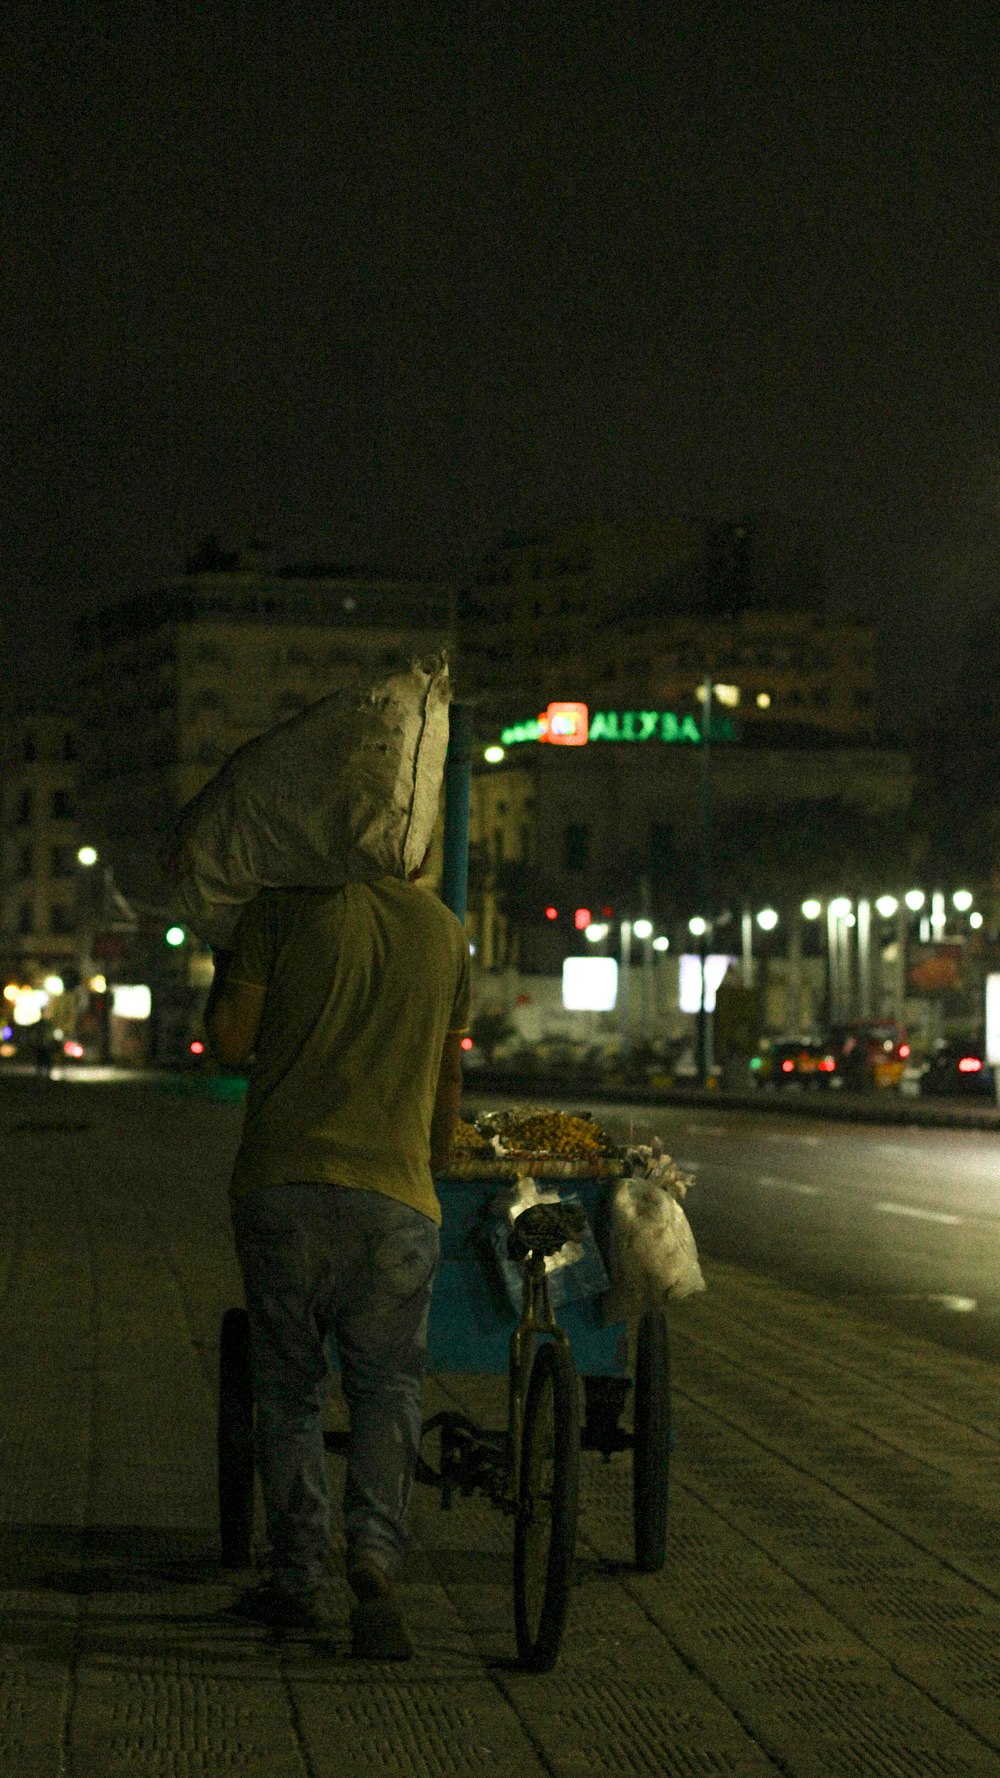 a man pushing a bike with a bag on the back of it